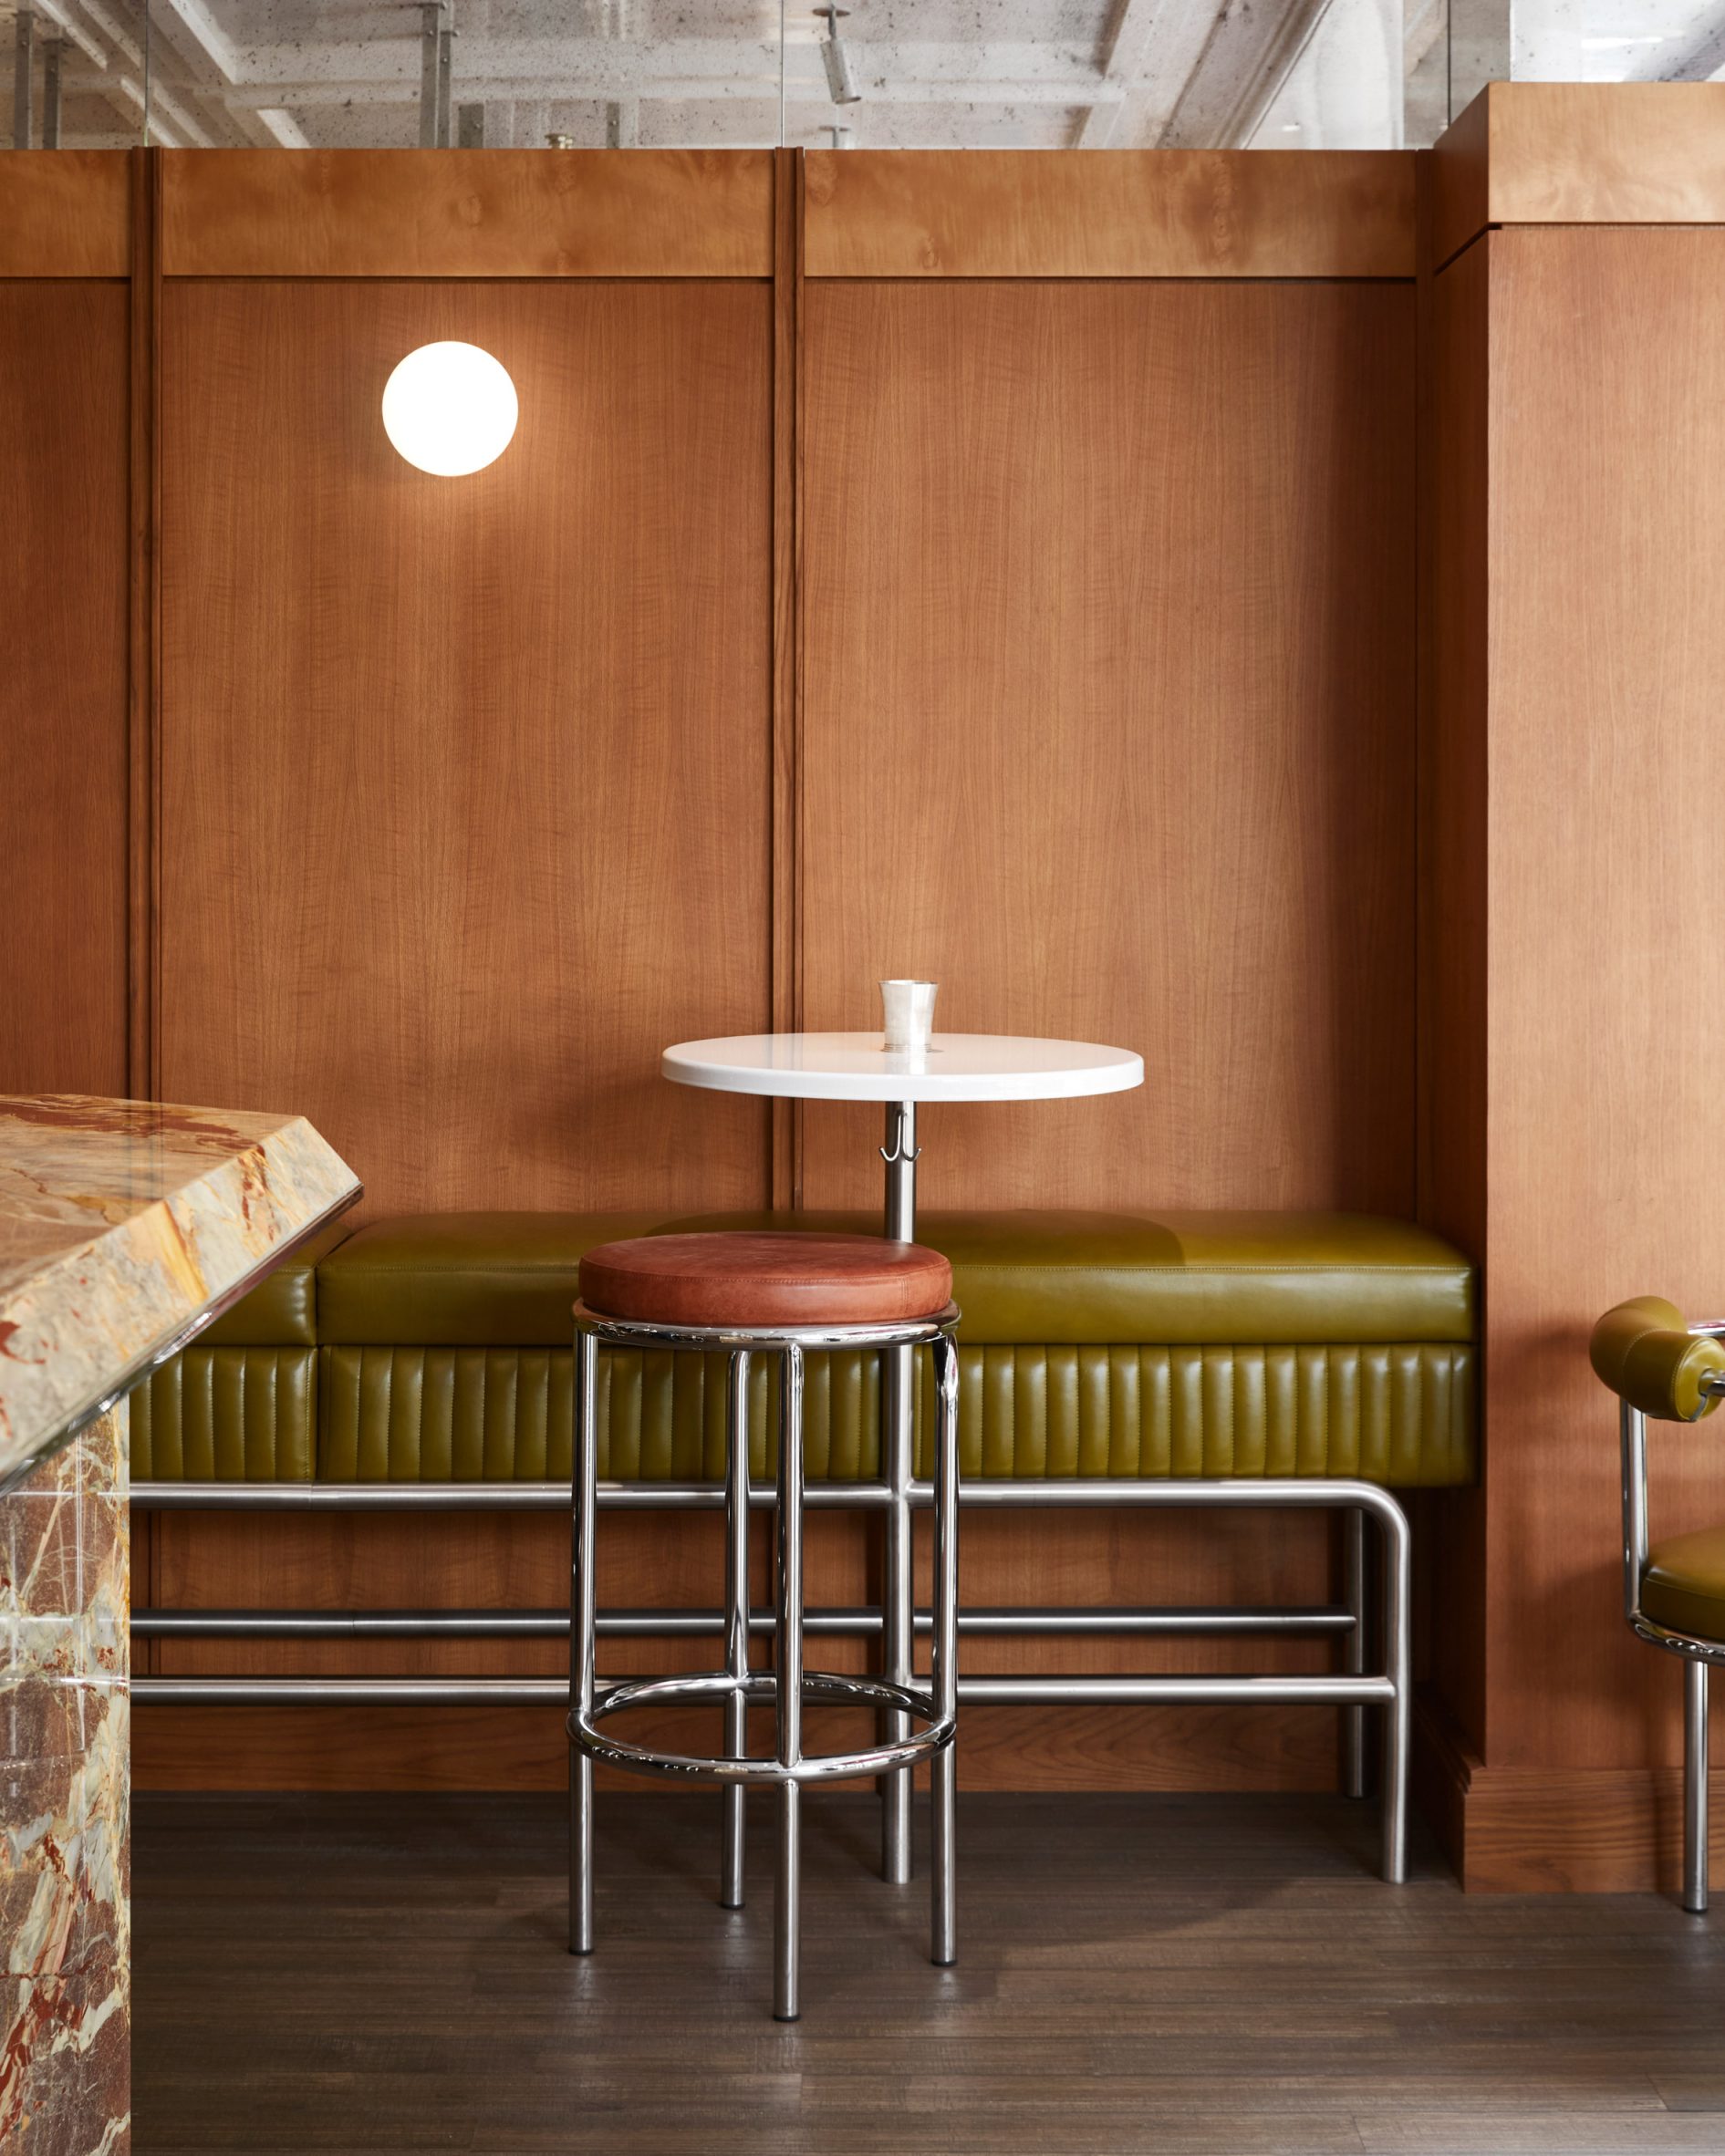 Wood panelling and green leather bench in Abstinence restaurant